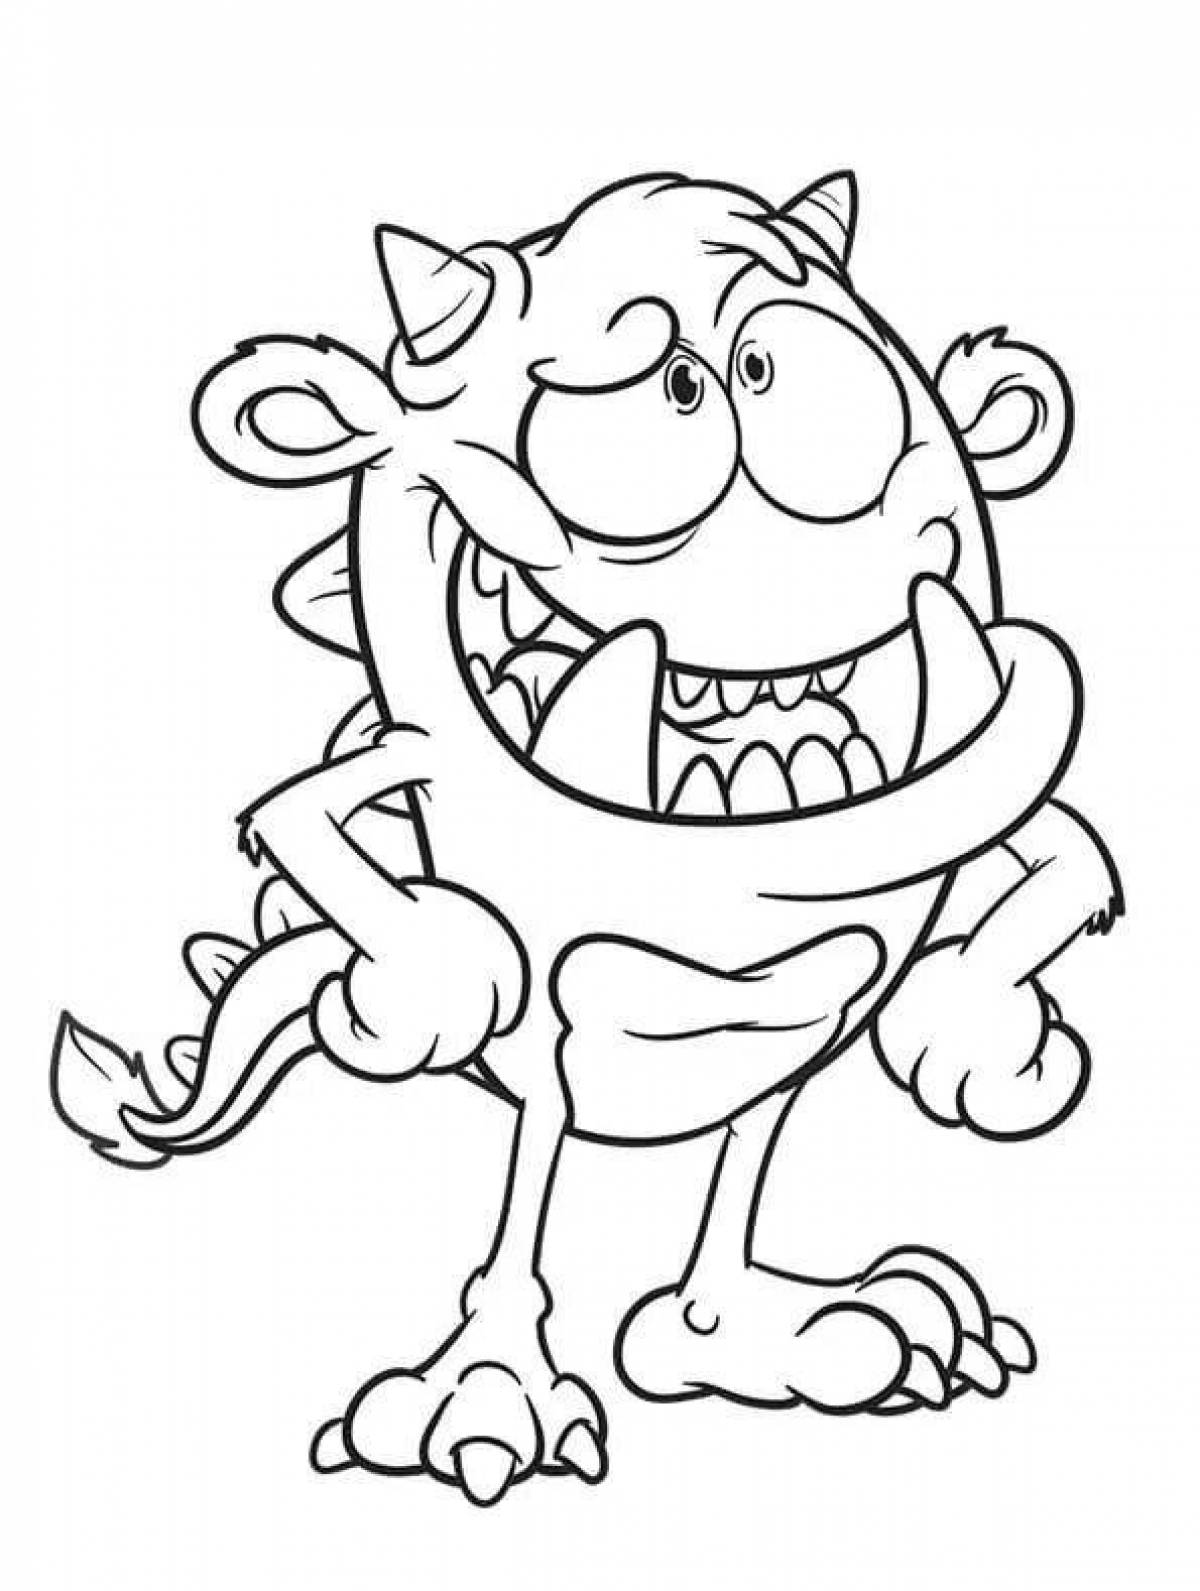 Sinister monster coloring page